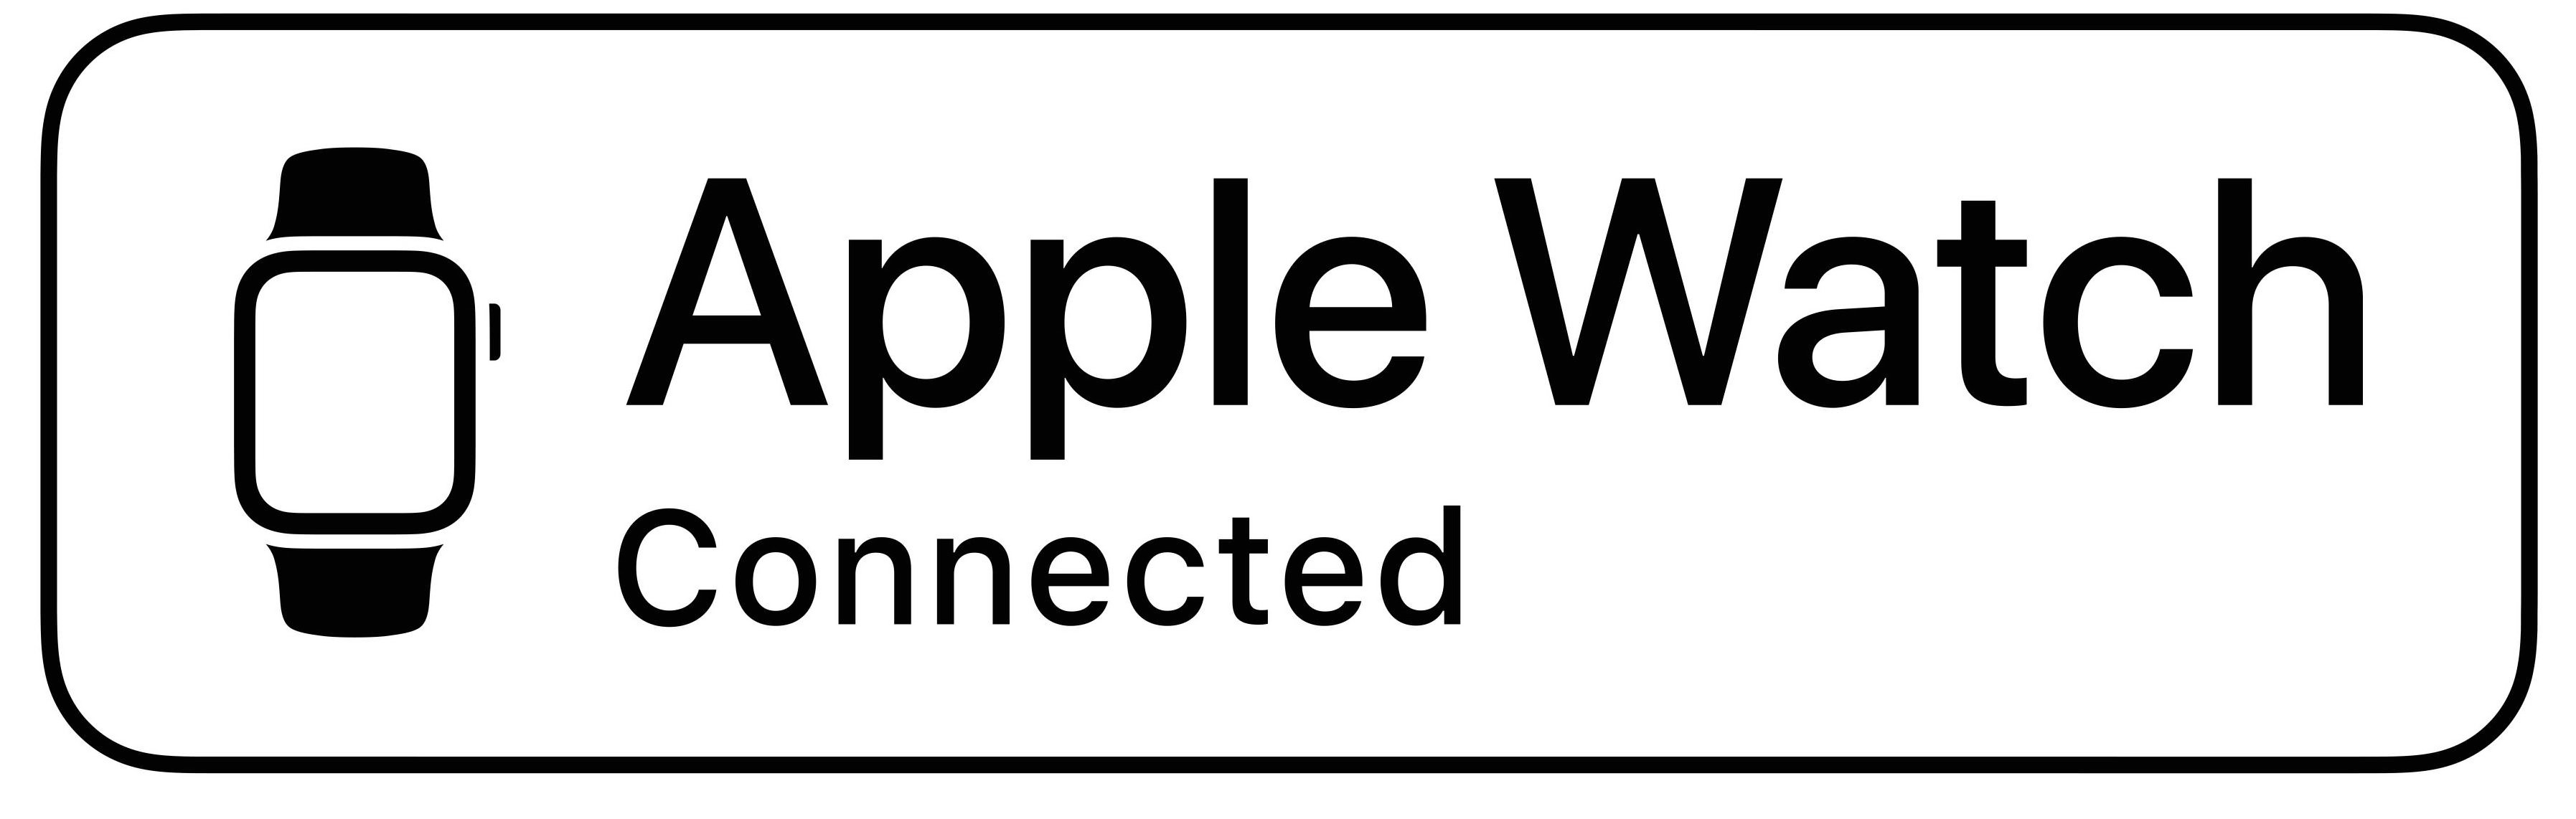  APPLE WATCH CONNECTED